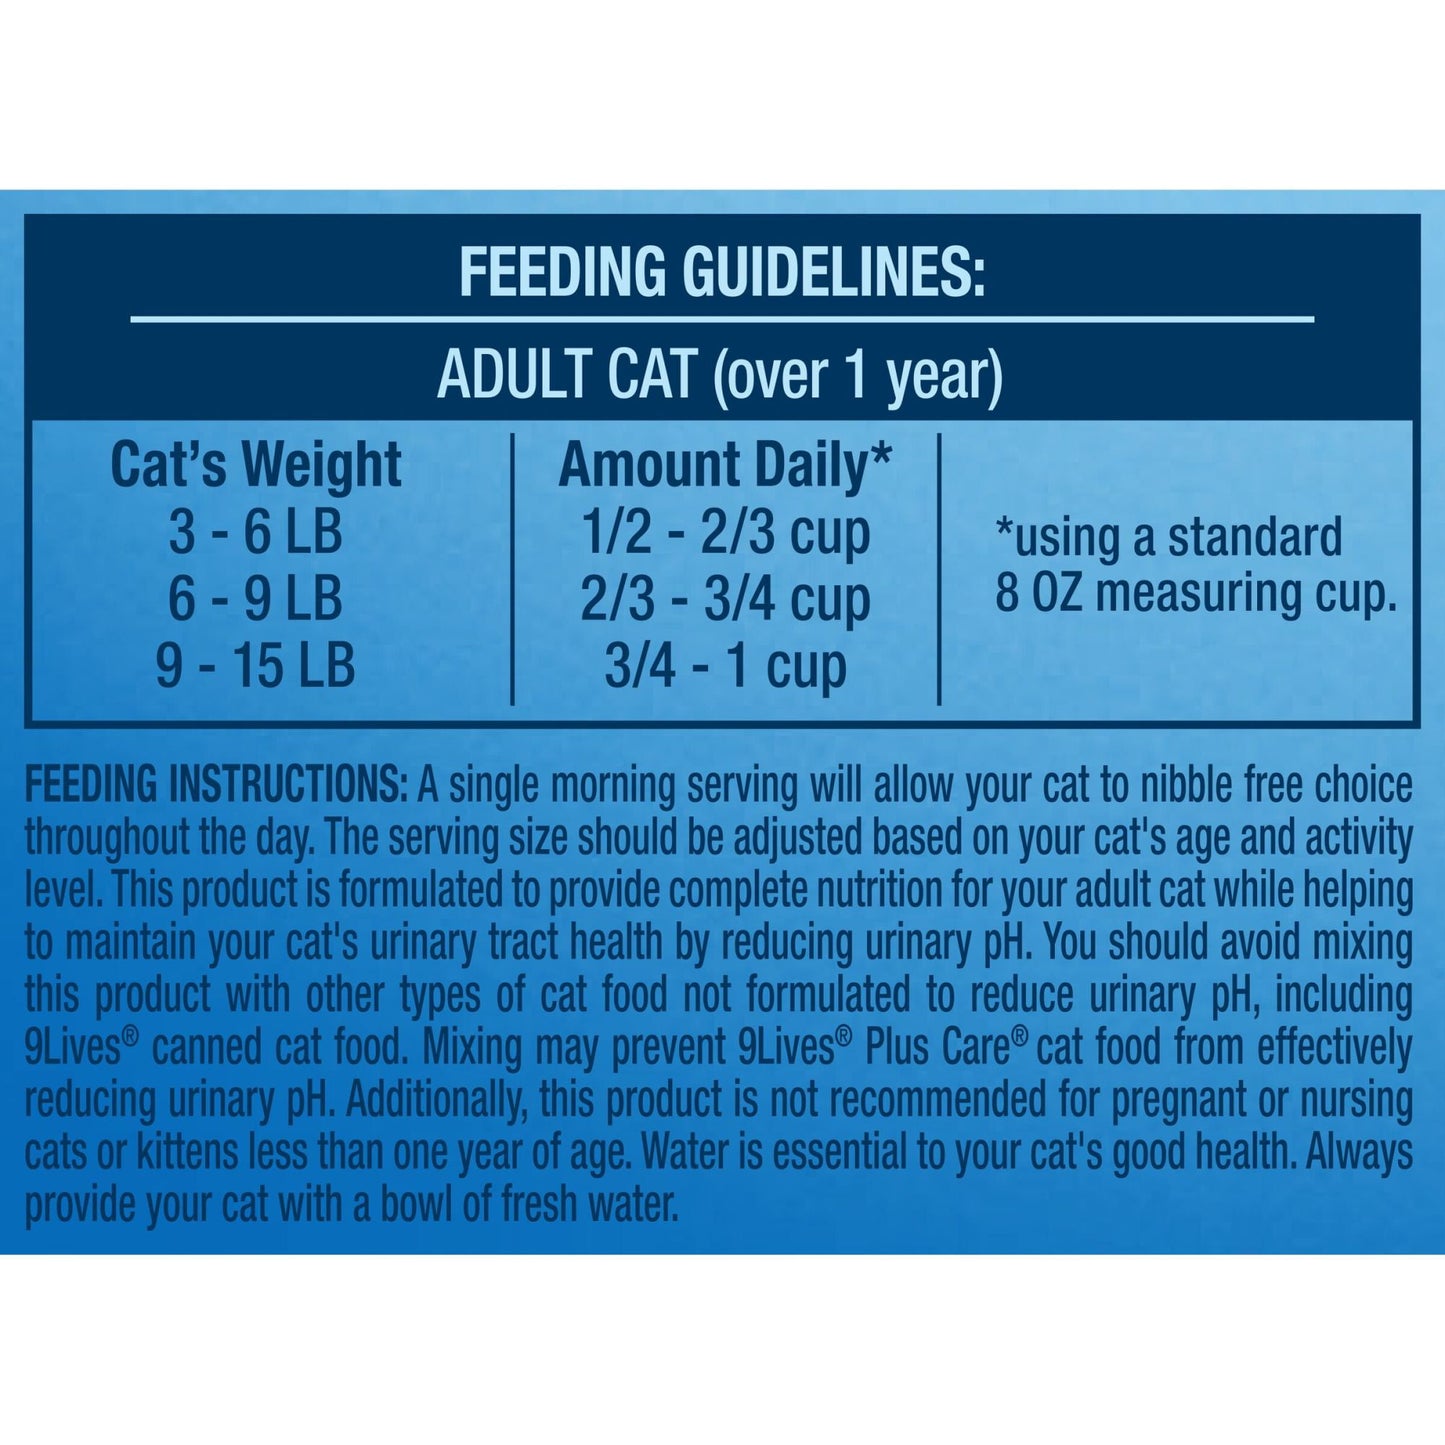 9Lives Plus Care Dry Cat Food With Tuna & Egg Flavors, 15.5 lb Bag